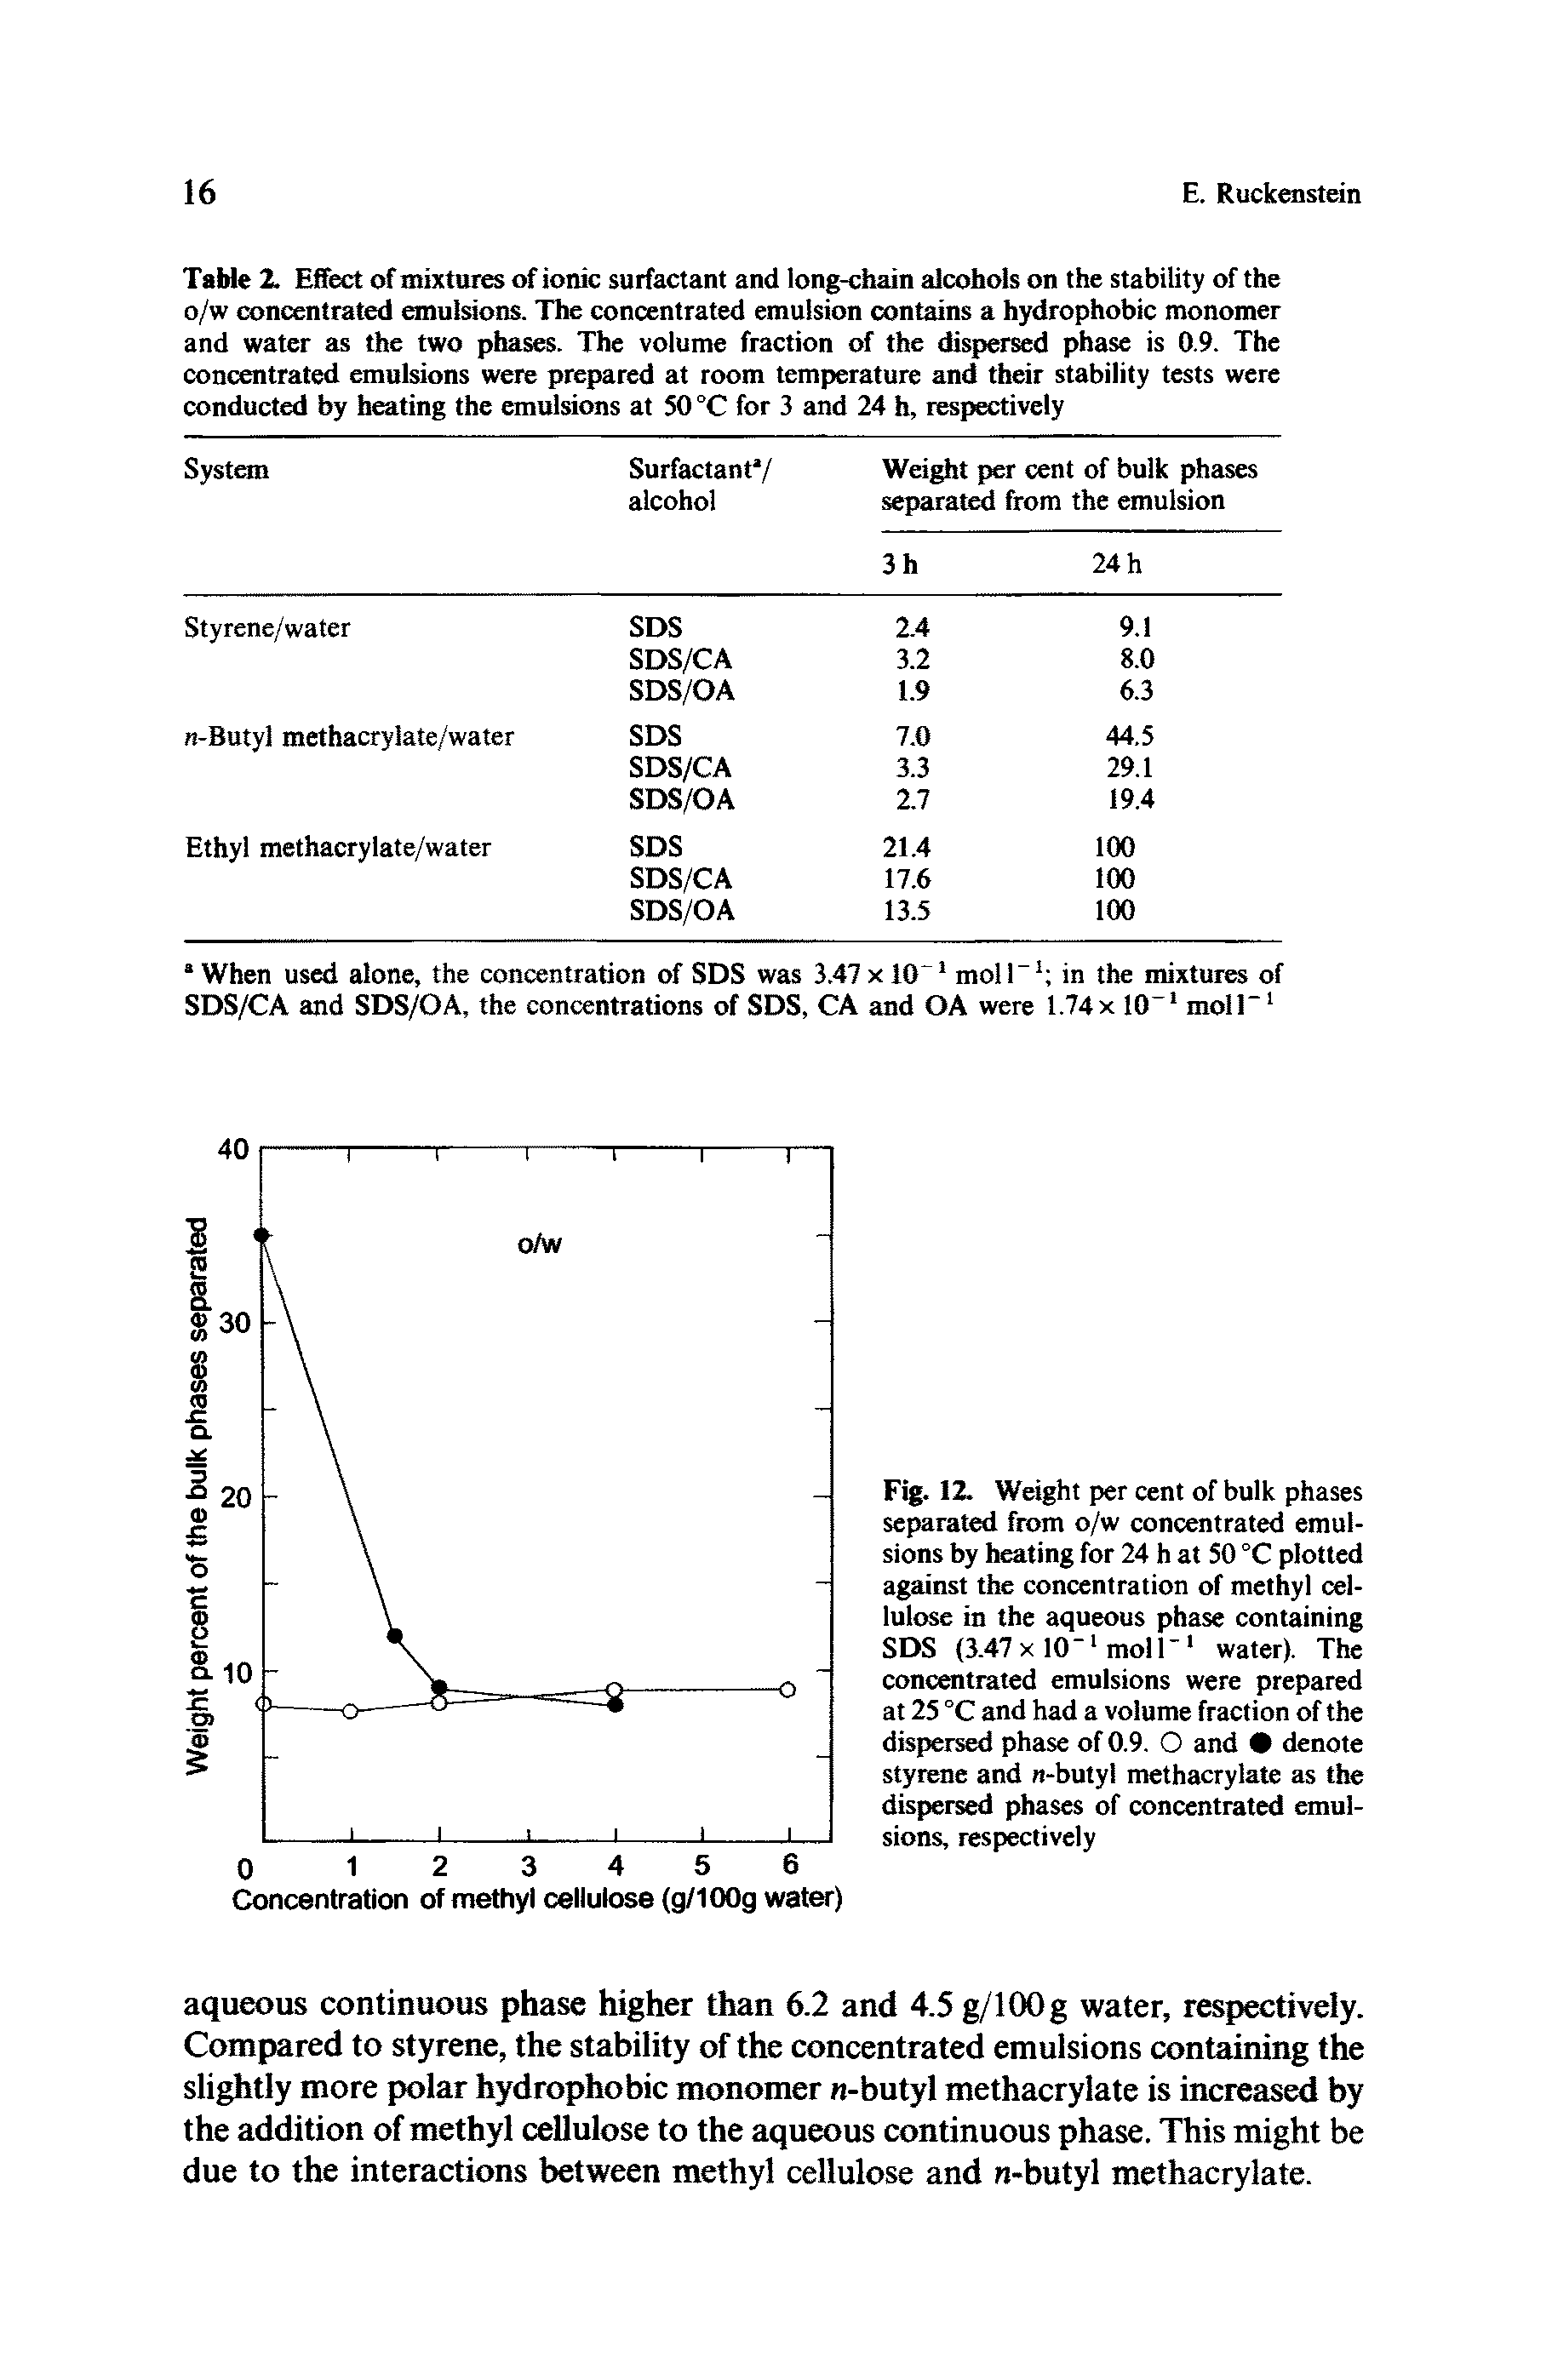 Table 2. Effect of mixtures of ionic surfactant and long-chain alcohols on the stability of the o/w concentrated emulsions. The concentrated emulsion contains a hydrophobic monomer and water as the two phases. The volume fraction of the dispersed phase is 0.9. The concentrated emulsions were prepared at room temperature and their stability tests were conducted by heating the emulsions at 50 °C for 3 and 24 h, respectively...